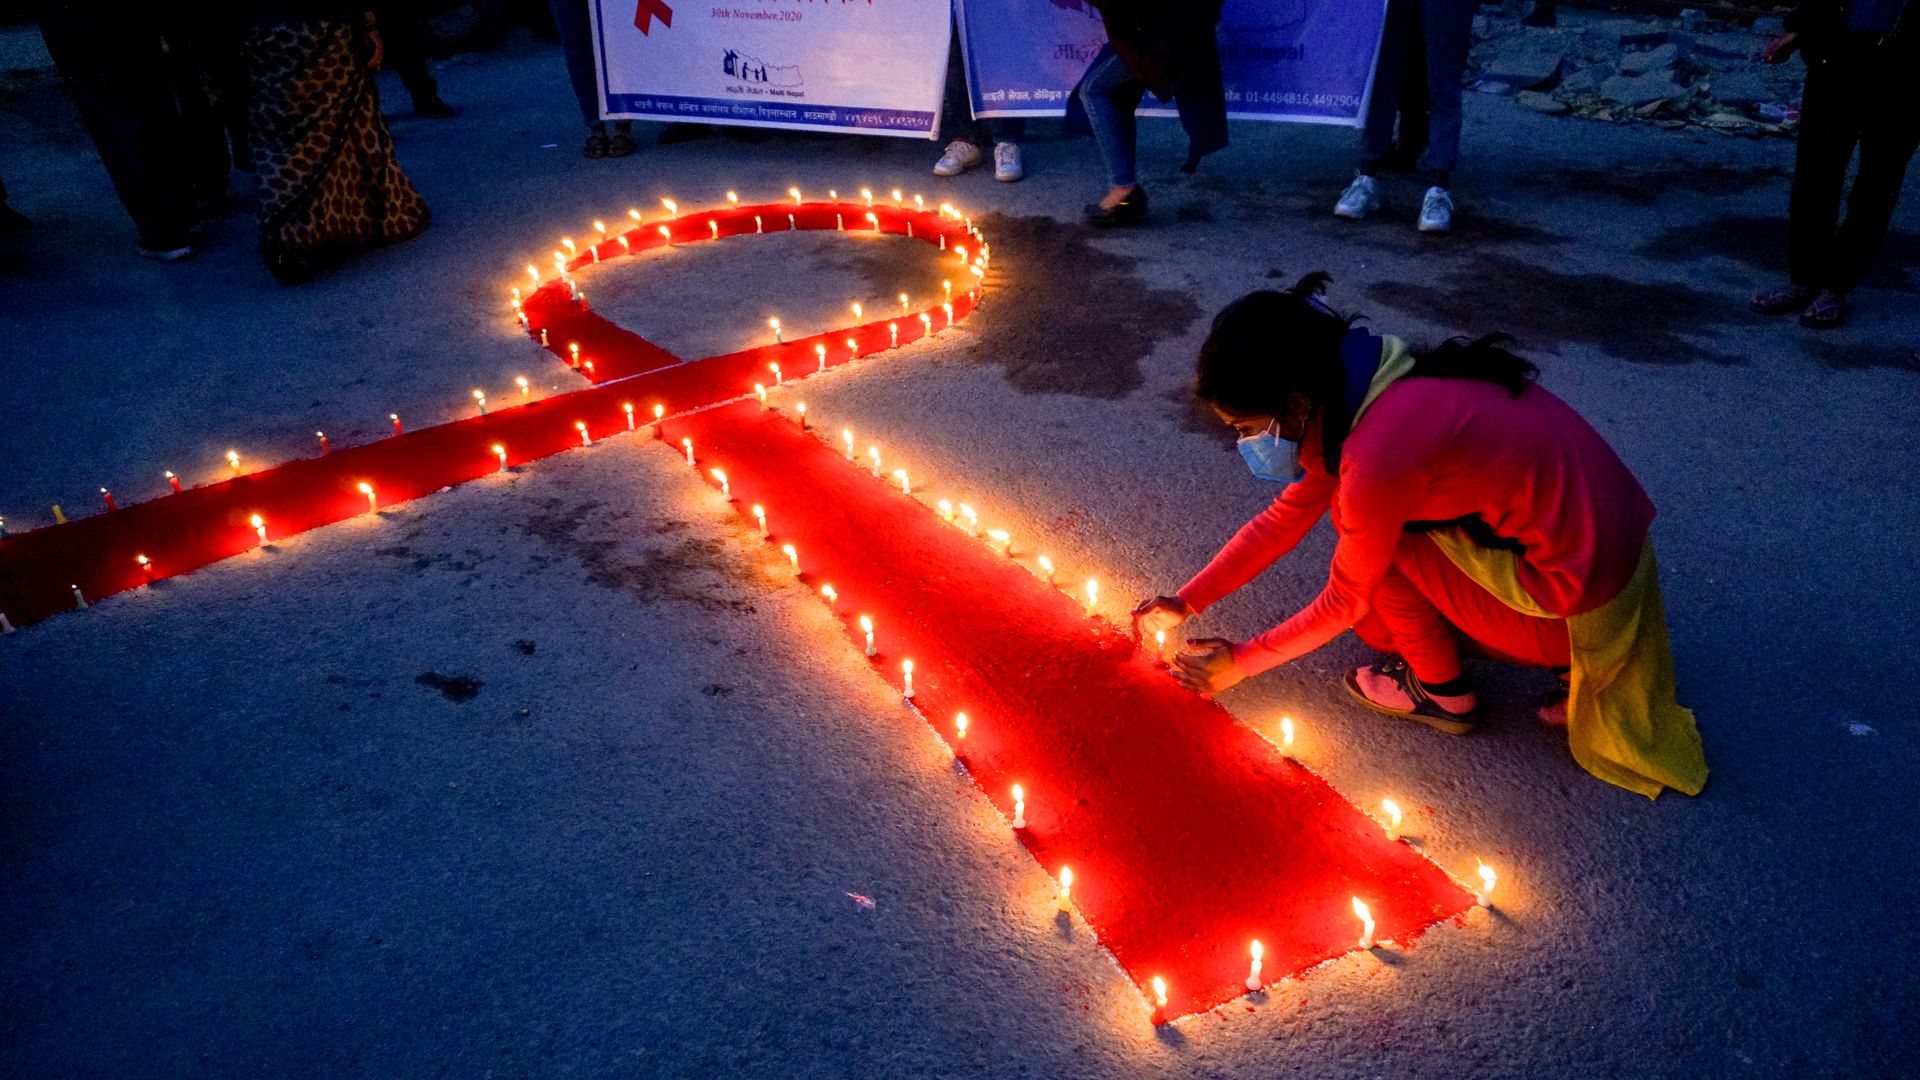  A woman lights candles forming a Red Ribbon (recognized symbol for AIDS awareness) as she prays for those who lost their lives due to HIV/Aids, on the eve of World AIDS Day